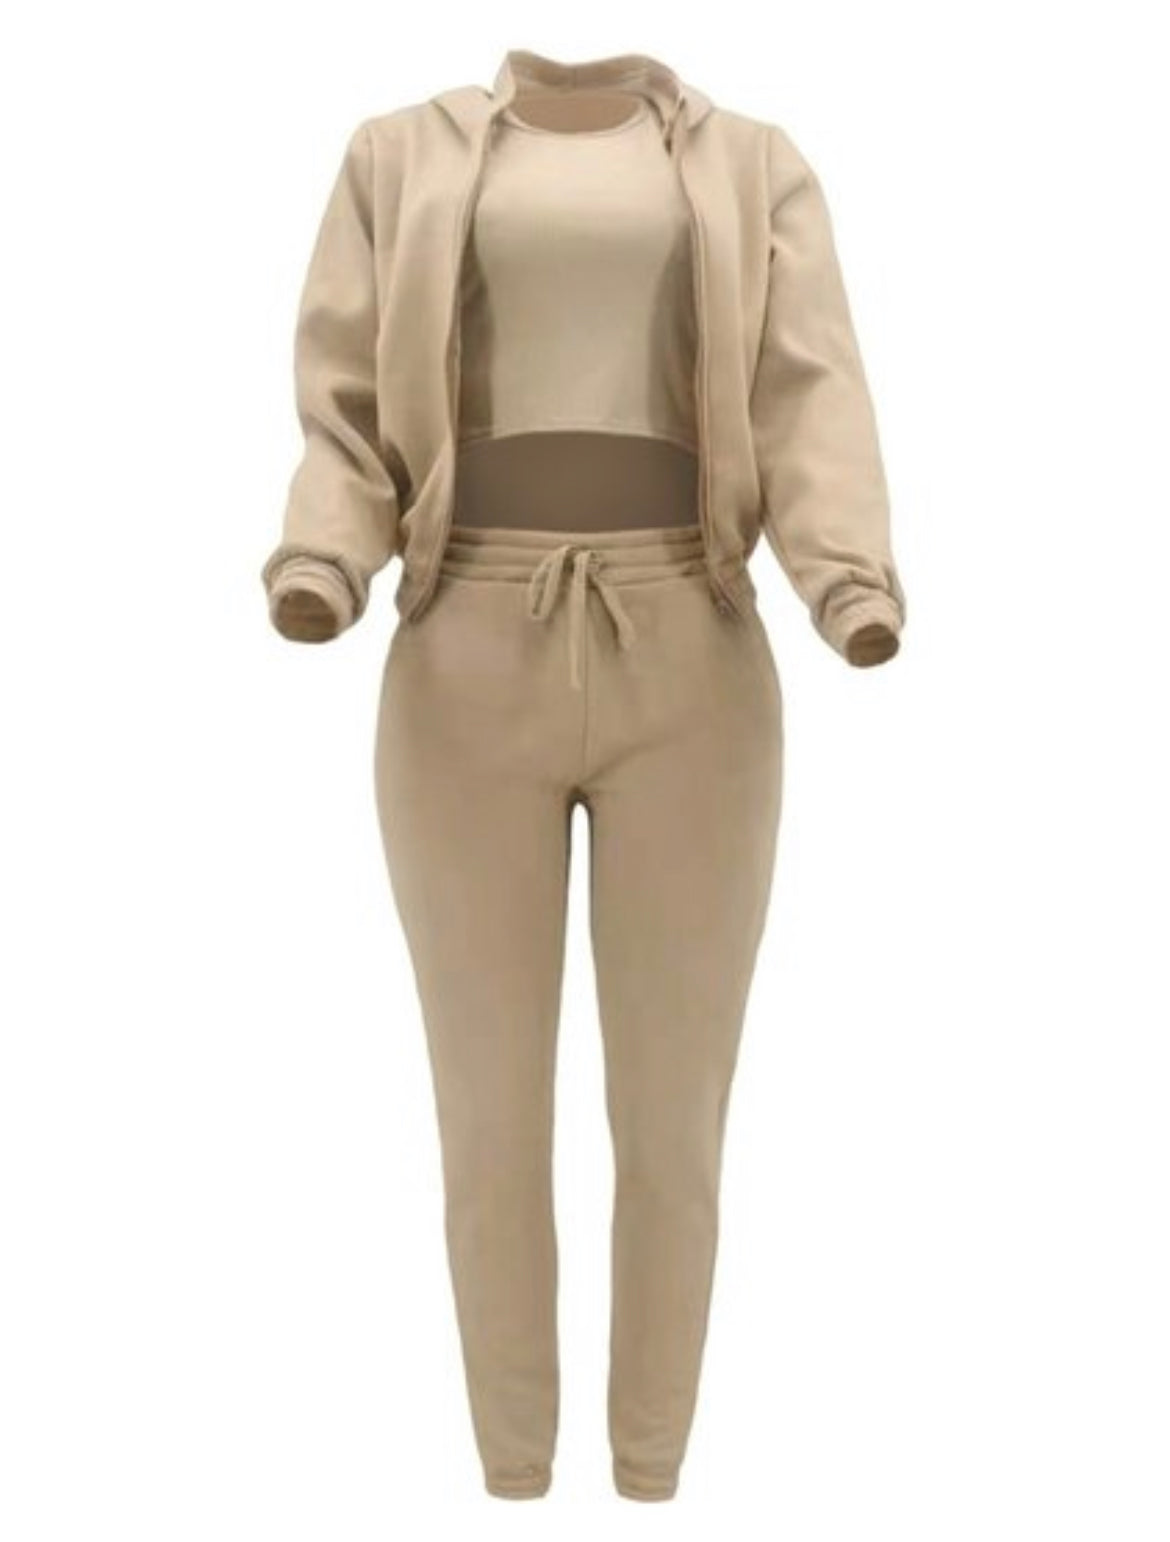 Tan Three-Piece Tracksuit Set – Rags 2 Riches Apparel